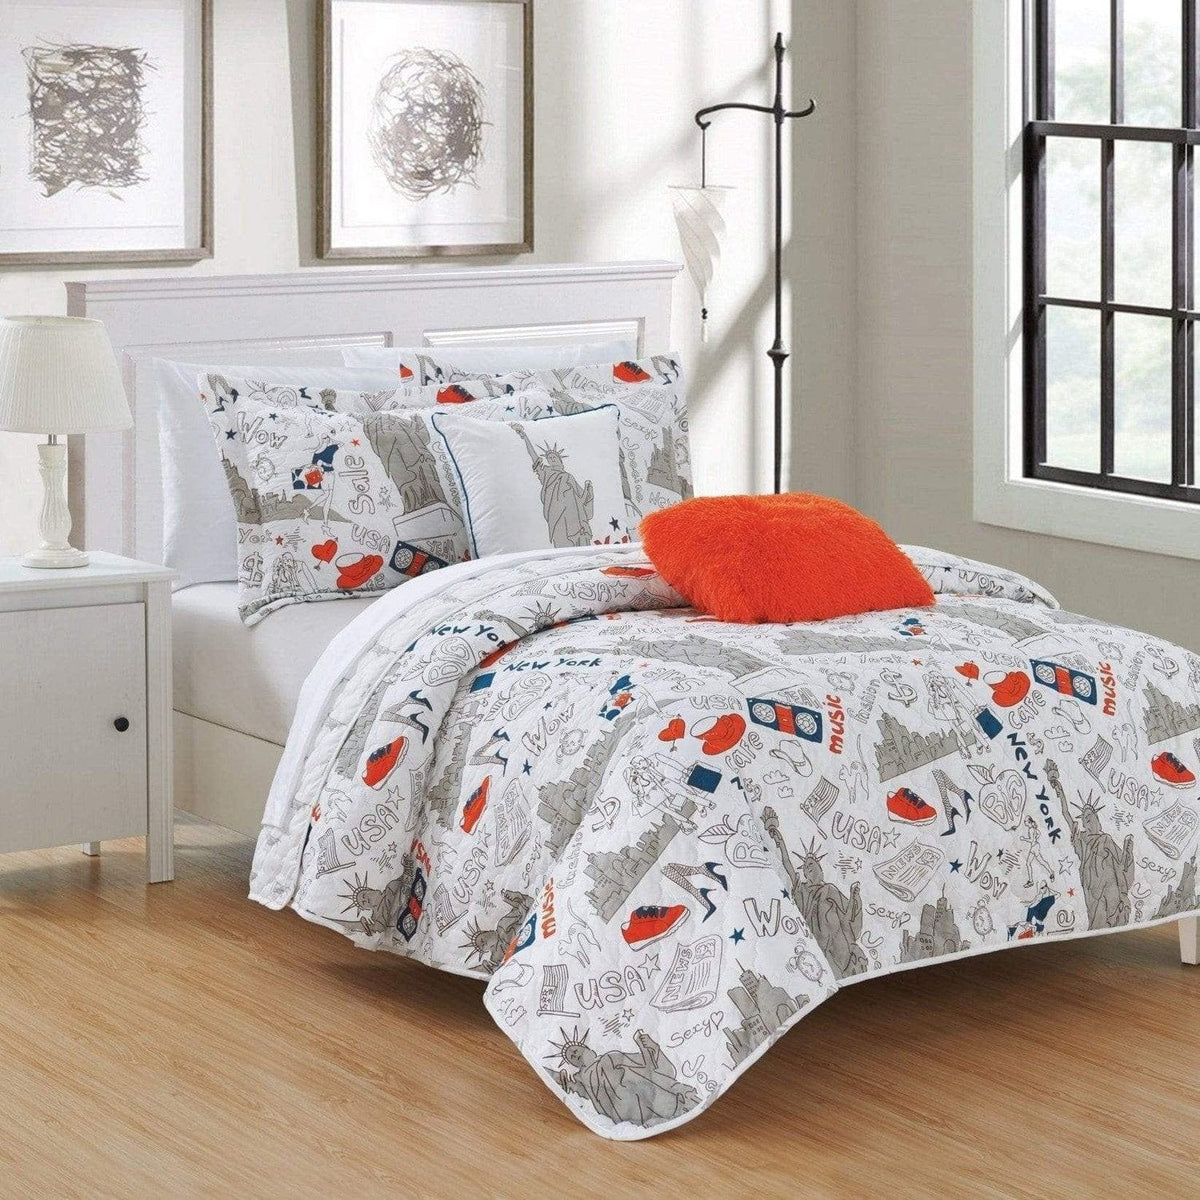 Chic Home New York 5 Piece Reversible Quilt Set 